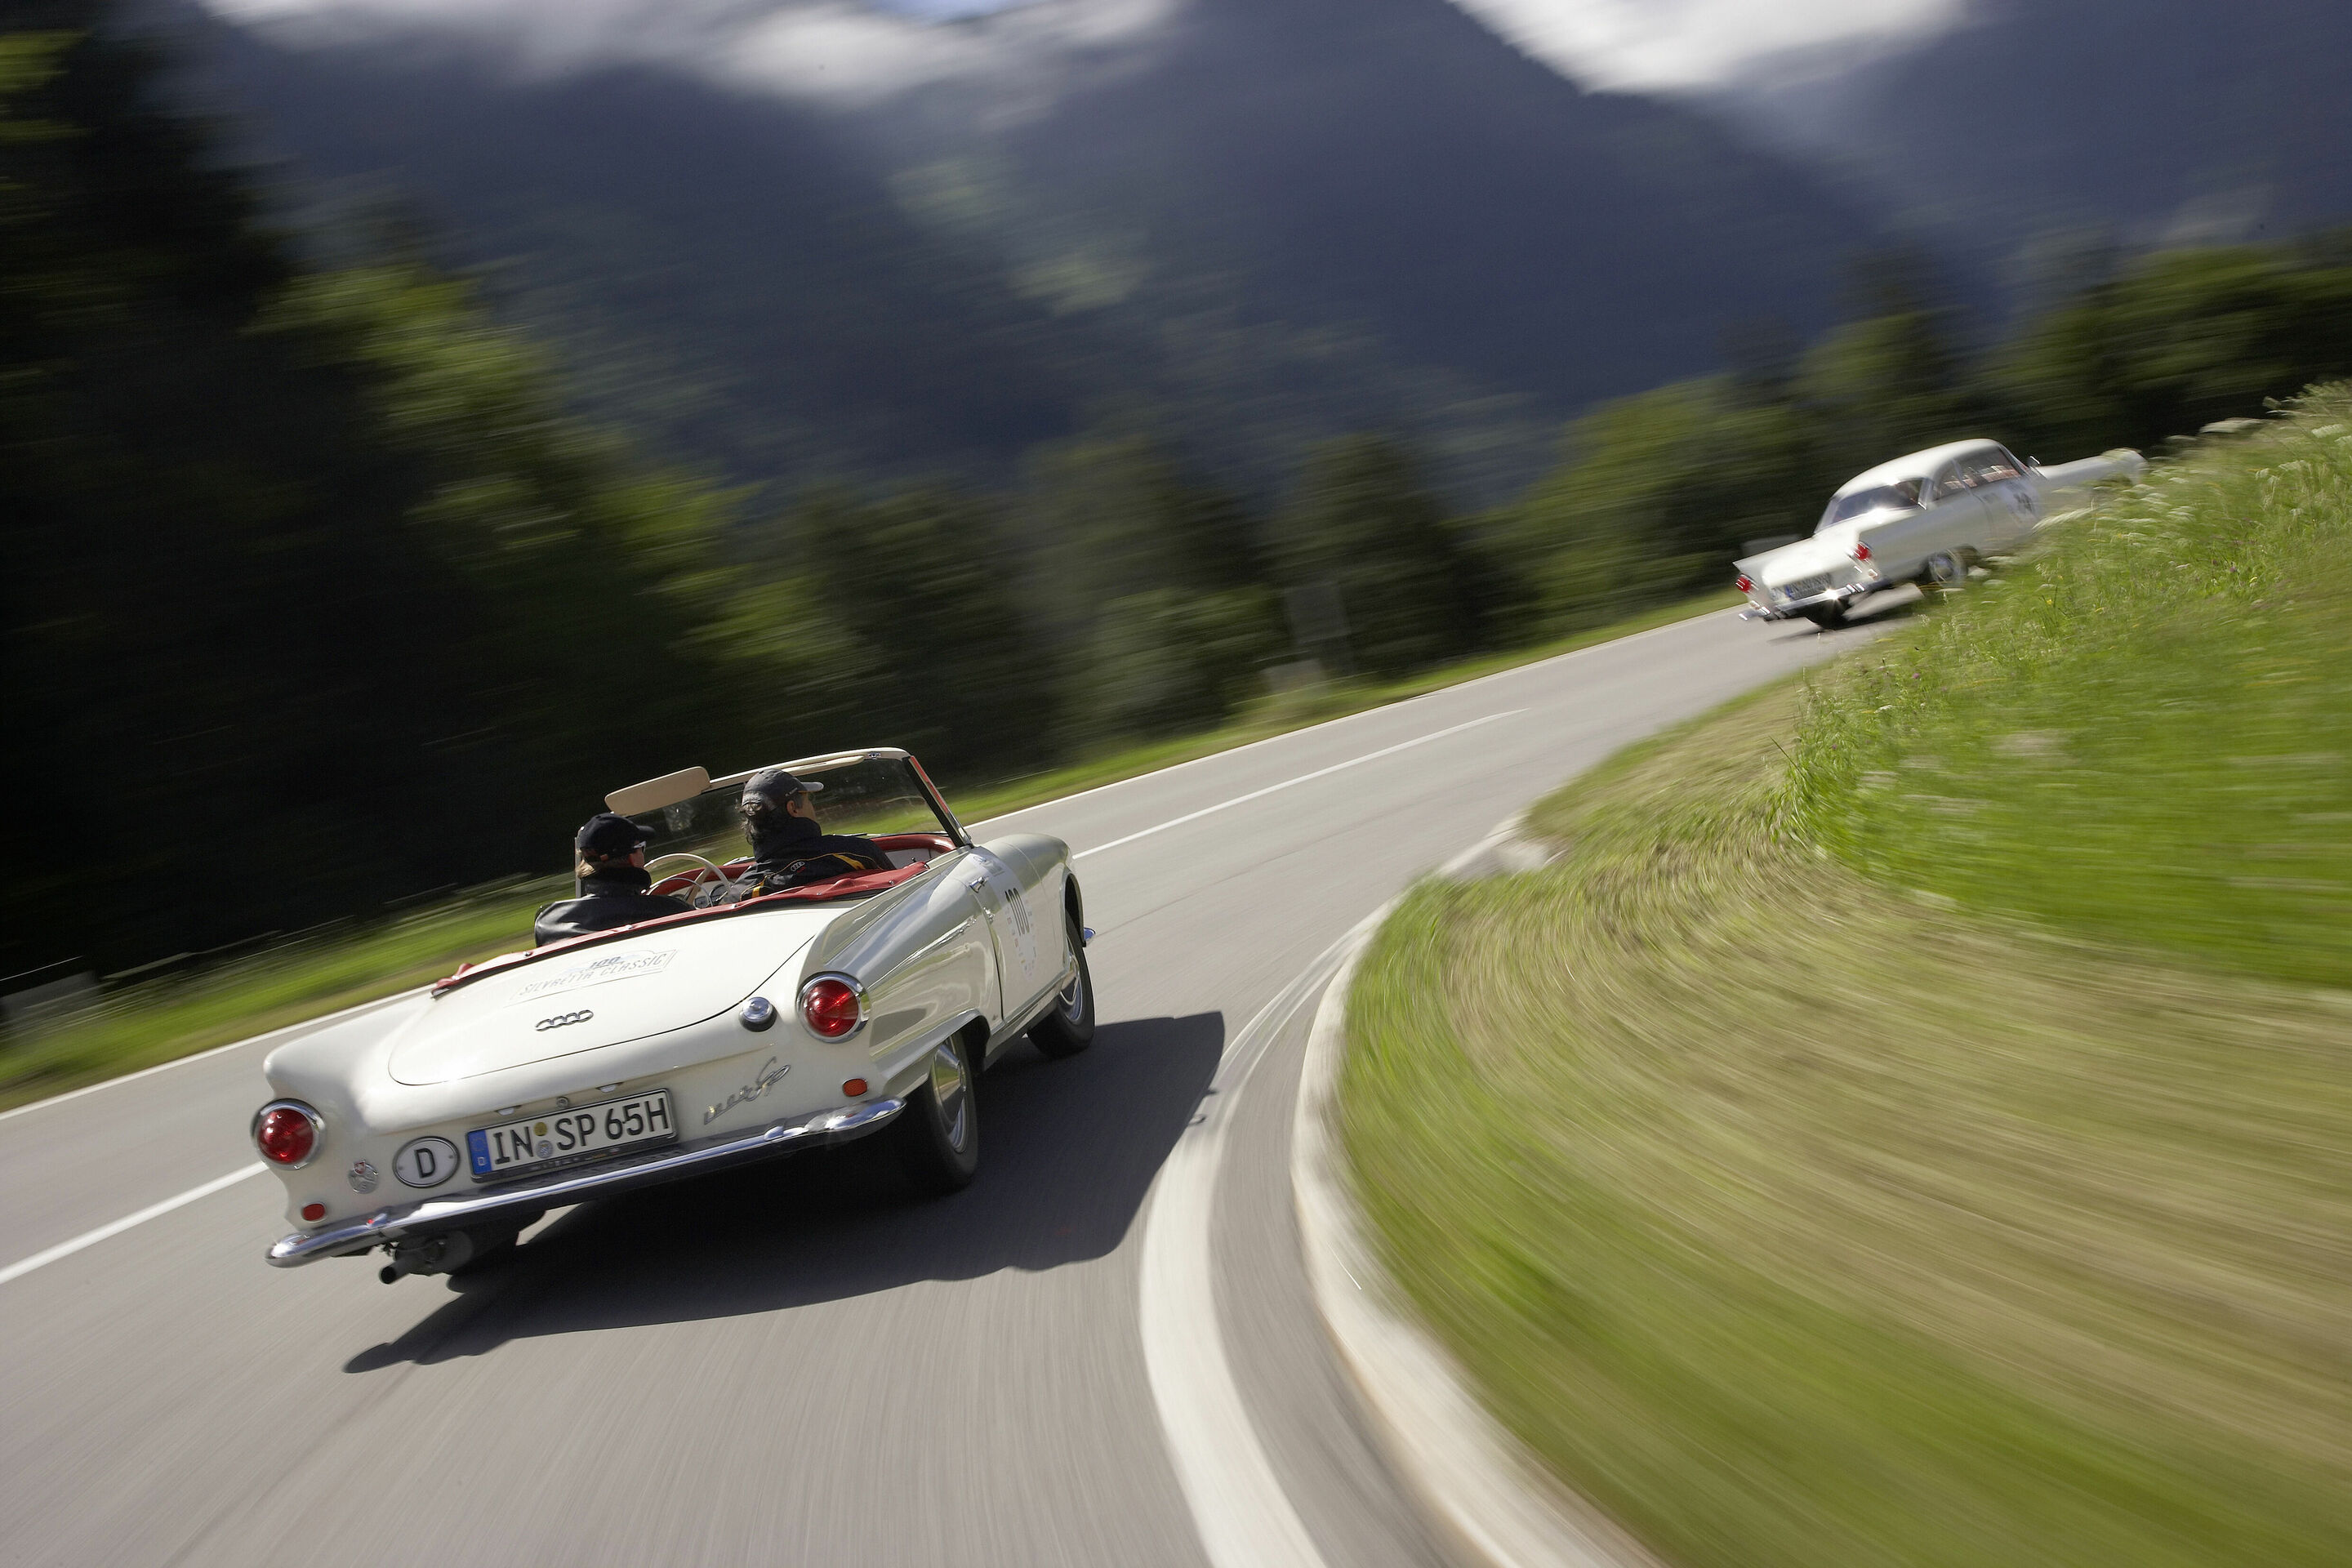 “The sky’s the limit”: Audi displays convertibles at Techno Classica